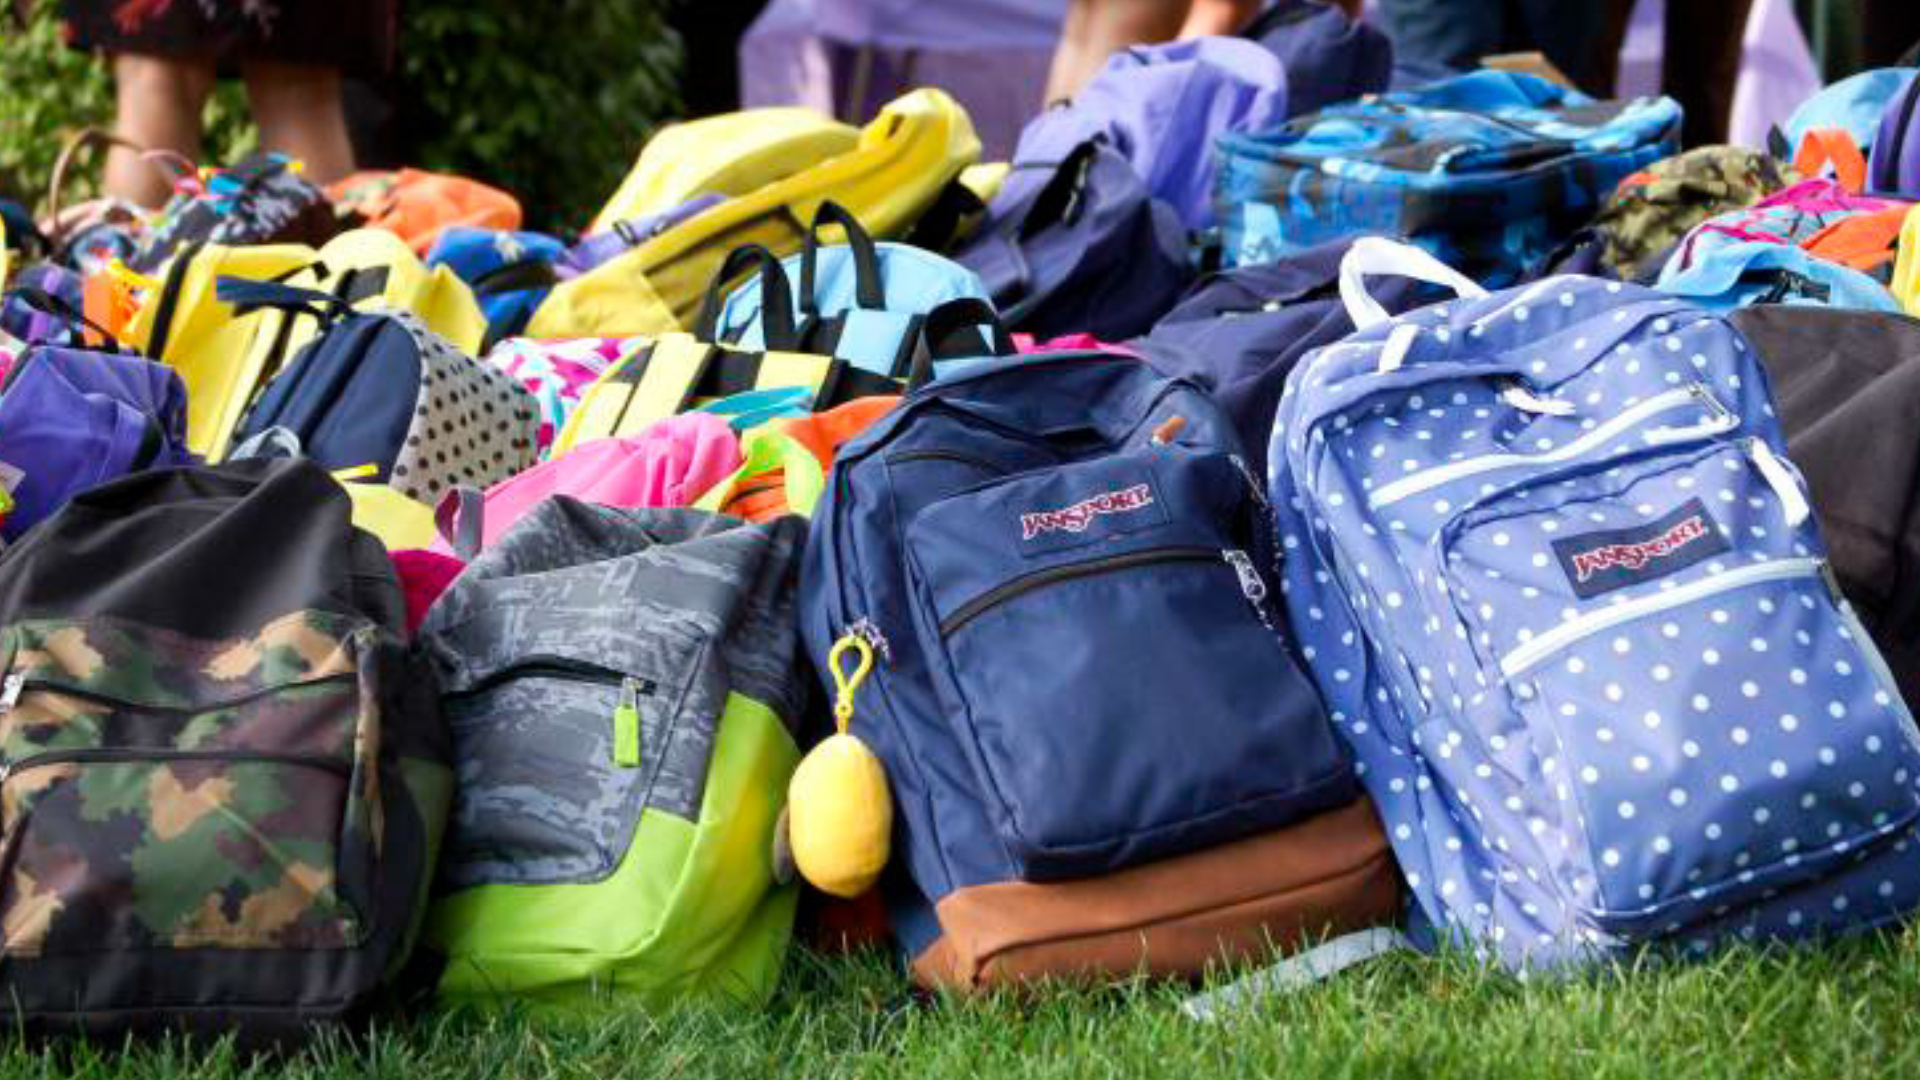 This back-to-school backpack drive is helping students in need